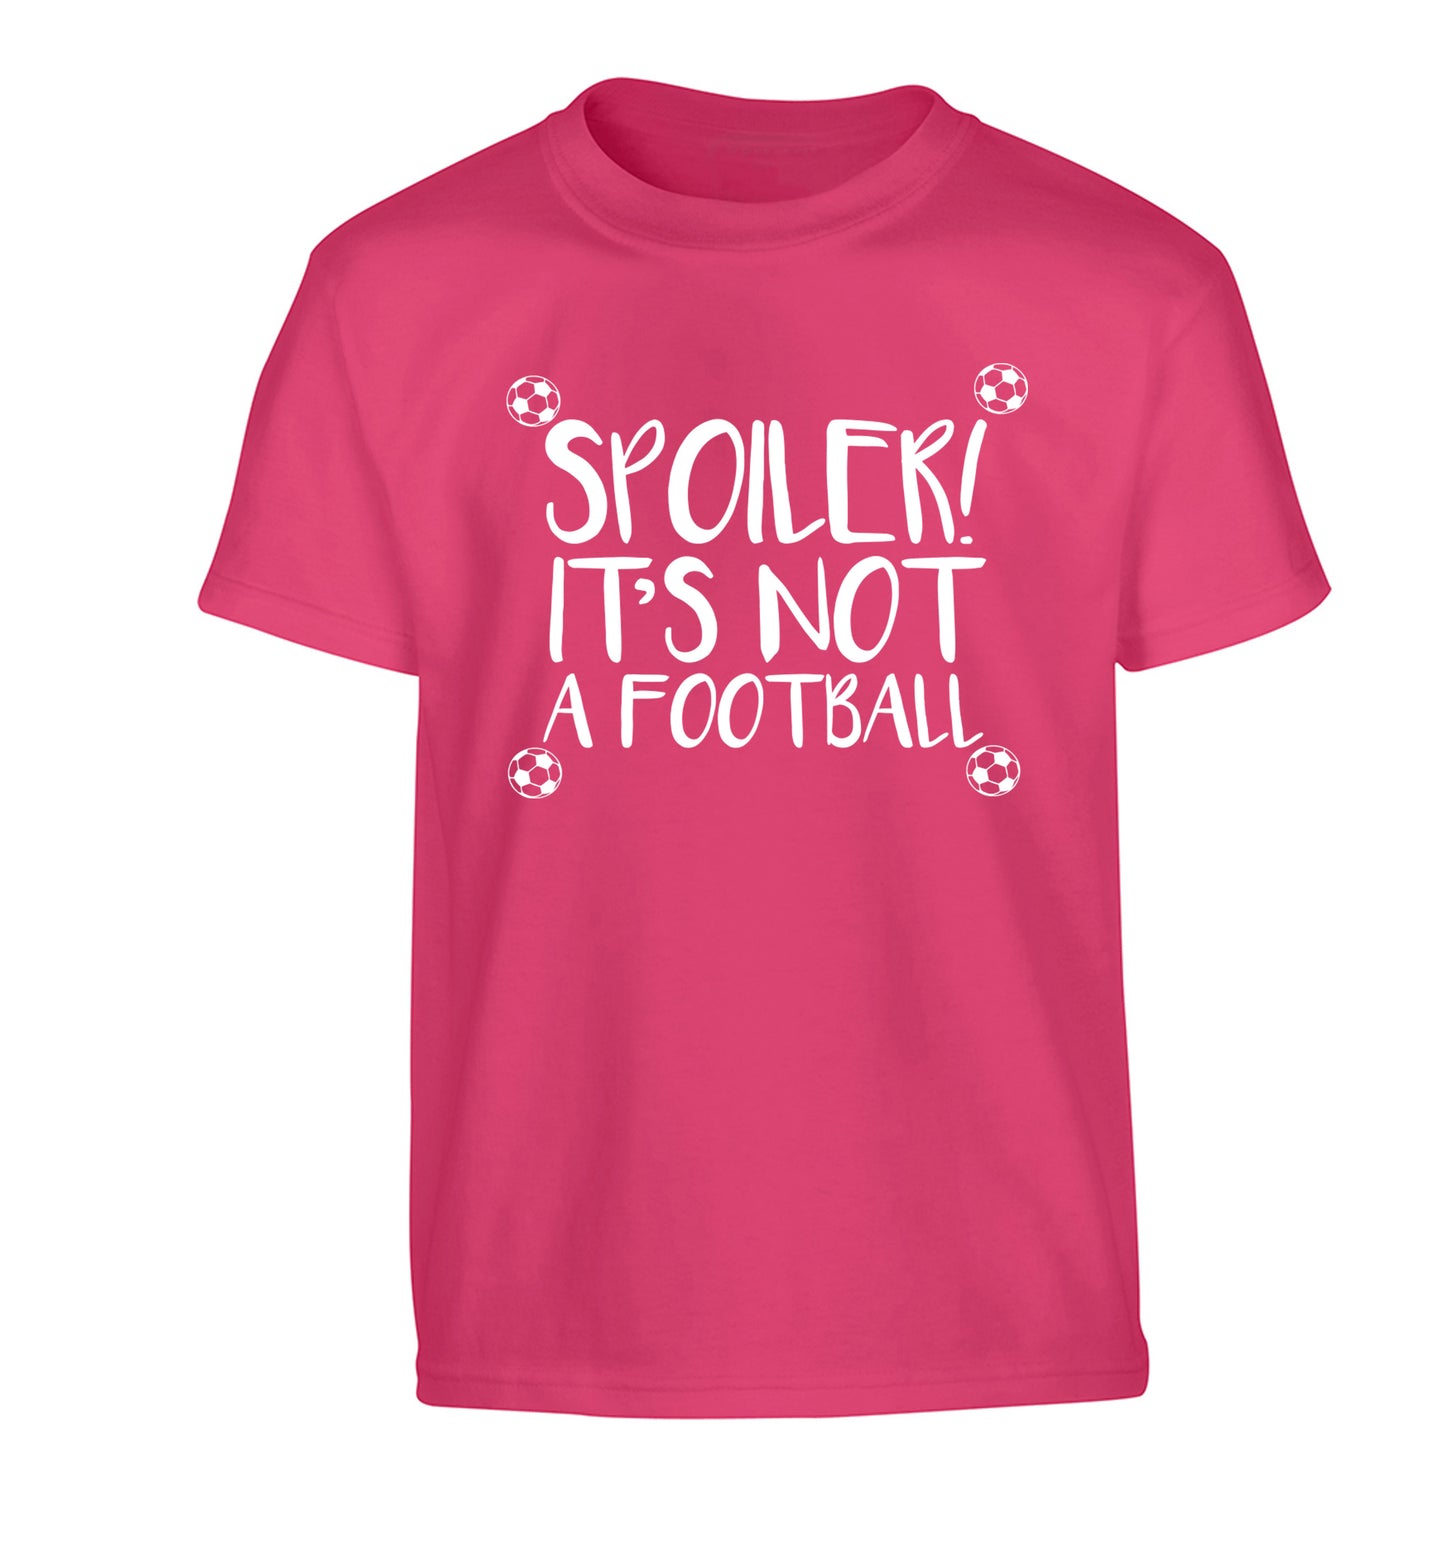 Spoiler it's not a football Children's pink Tshirt 12-13 Years